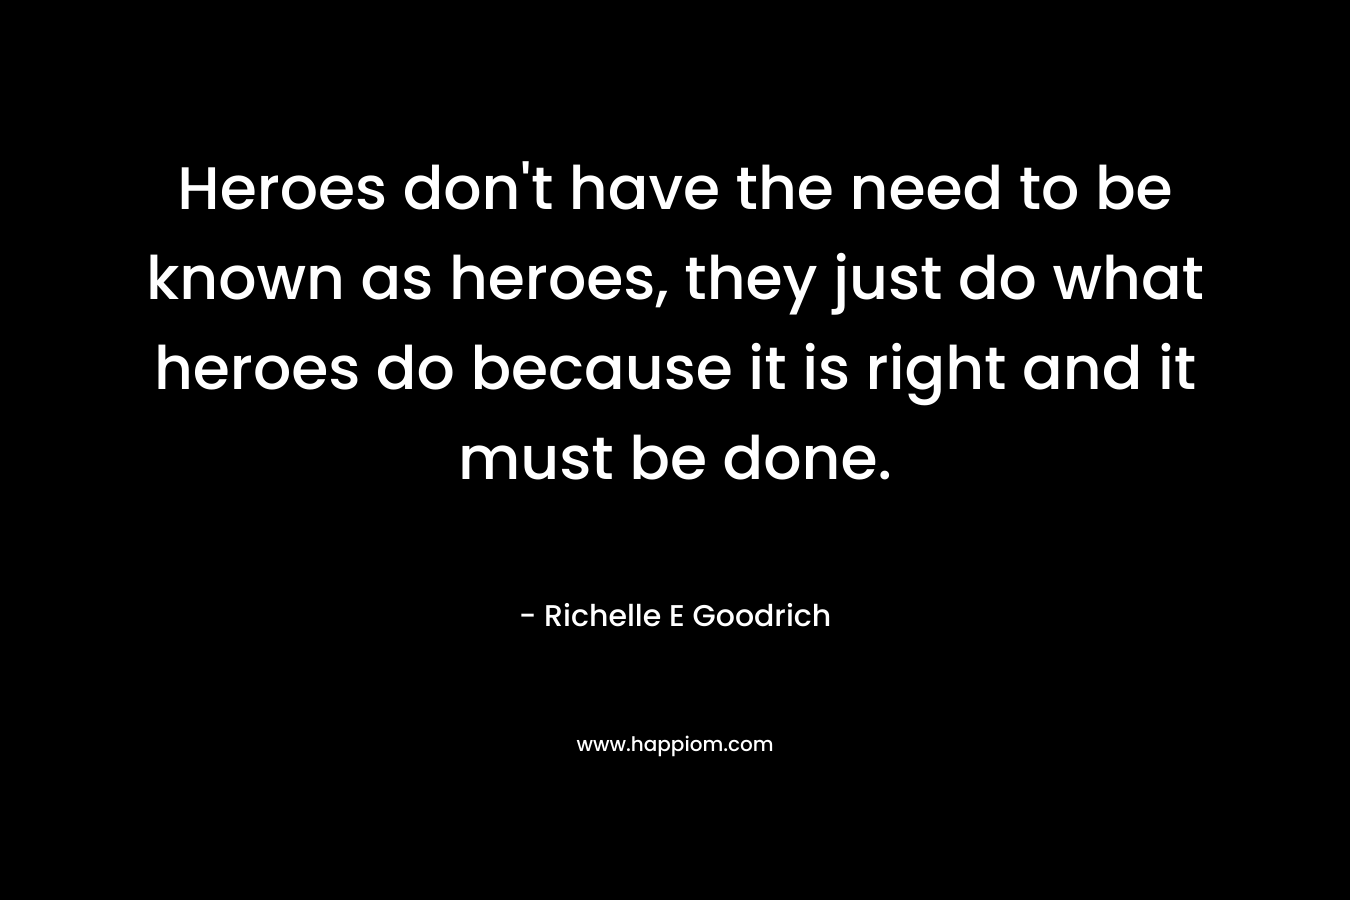 Heroes don't have the need to be known as heroes, they just do what heroes do because it is right and it must be done.